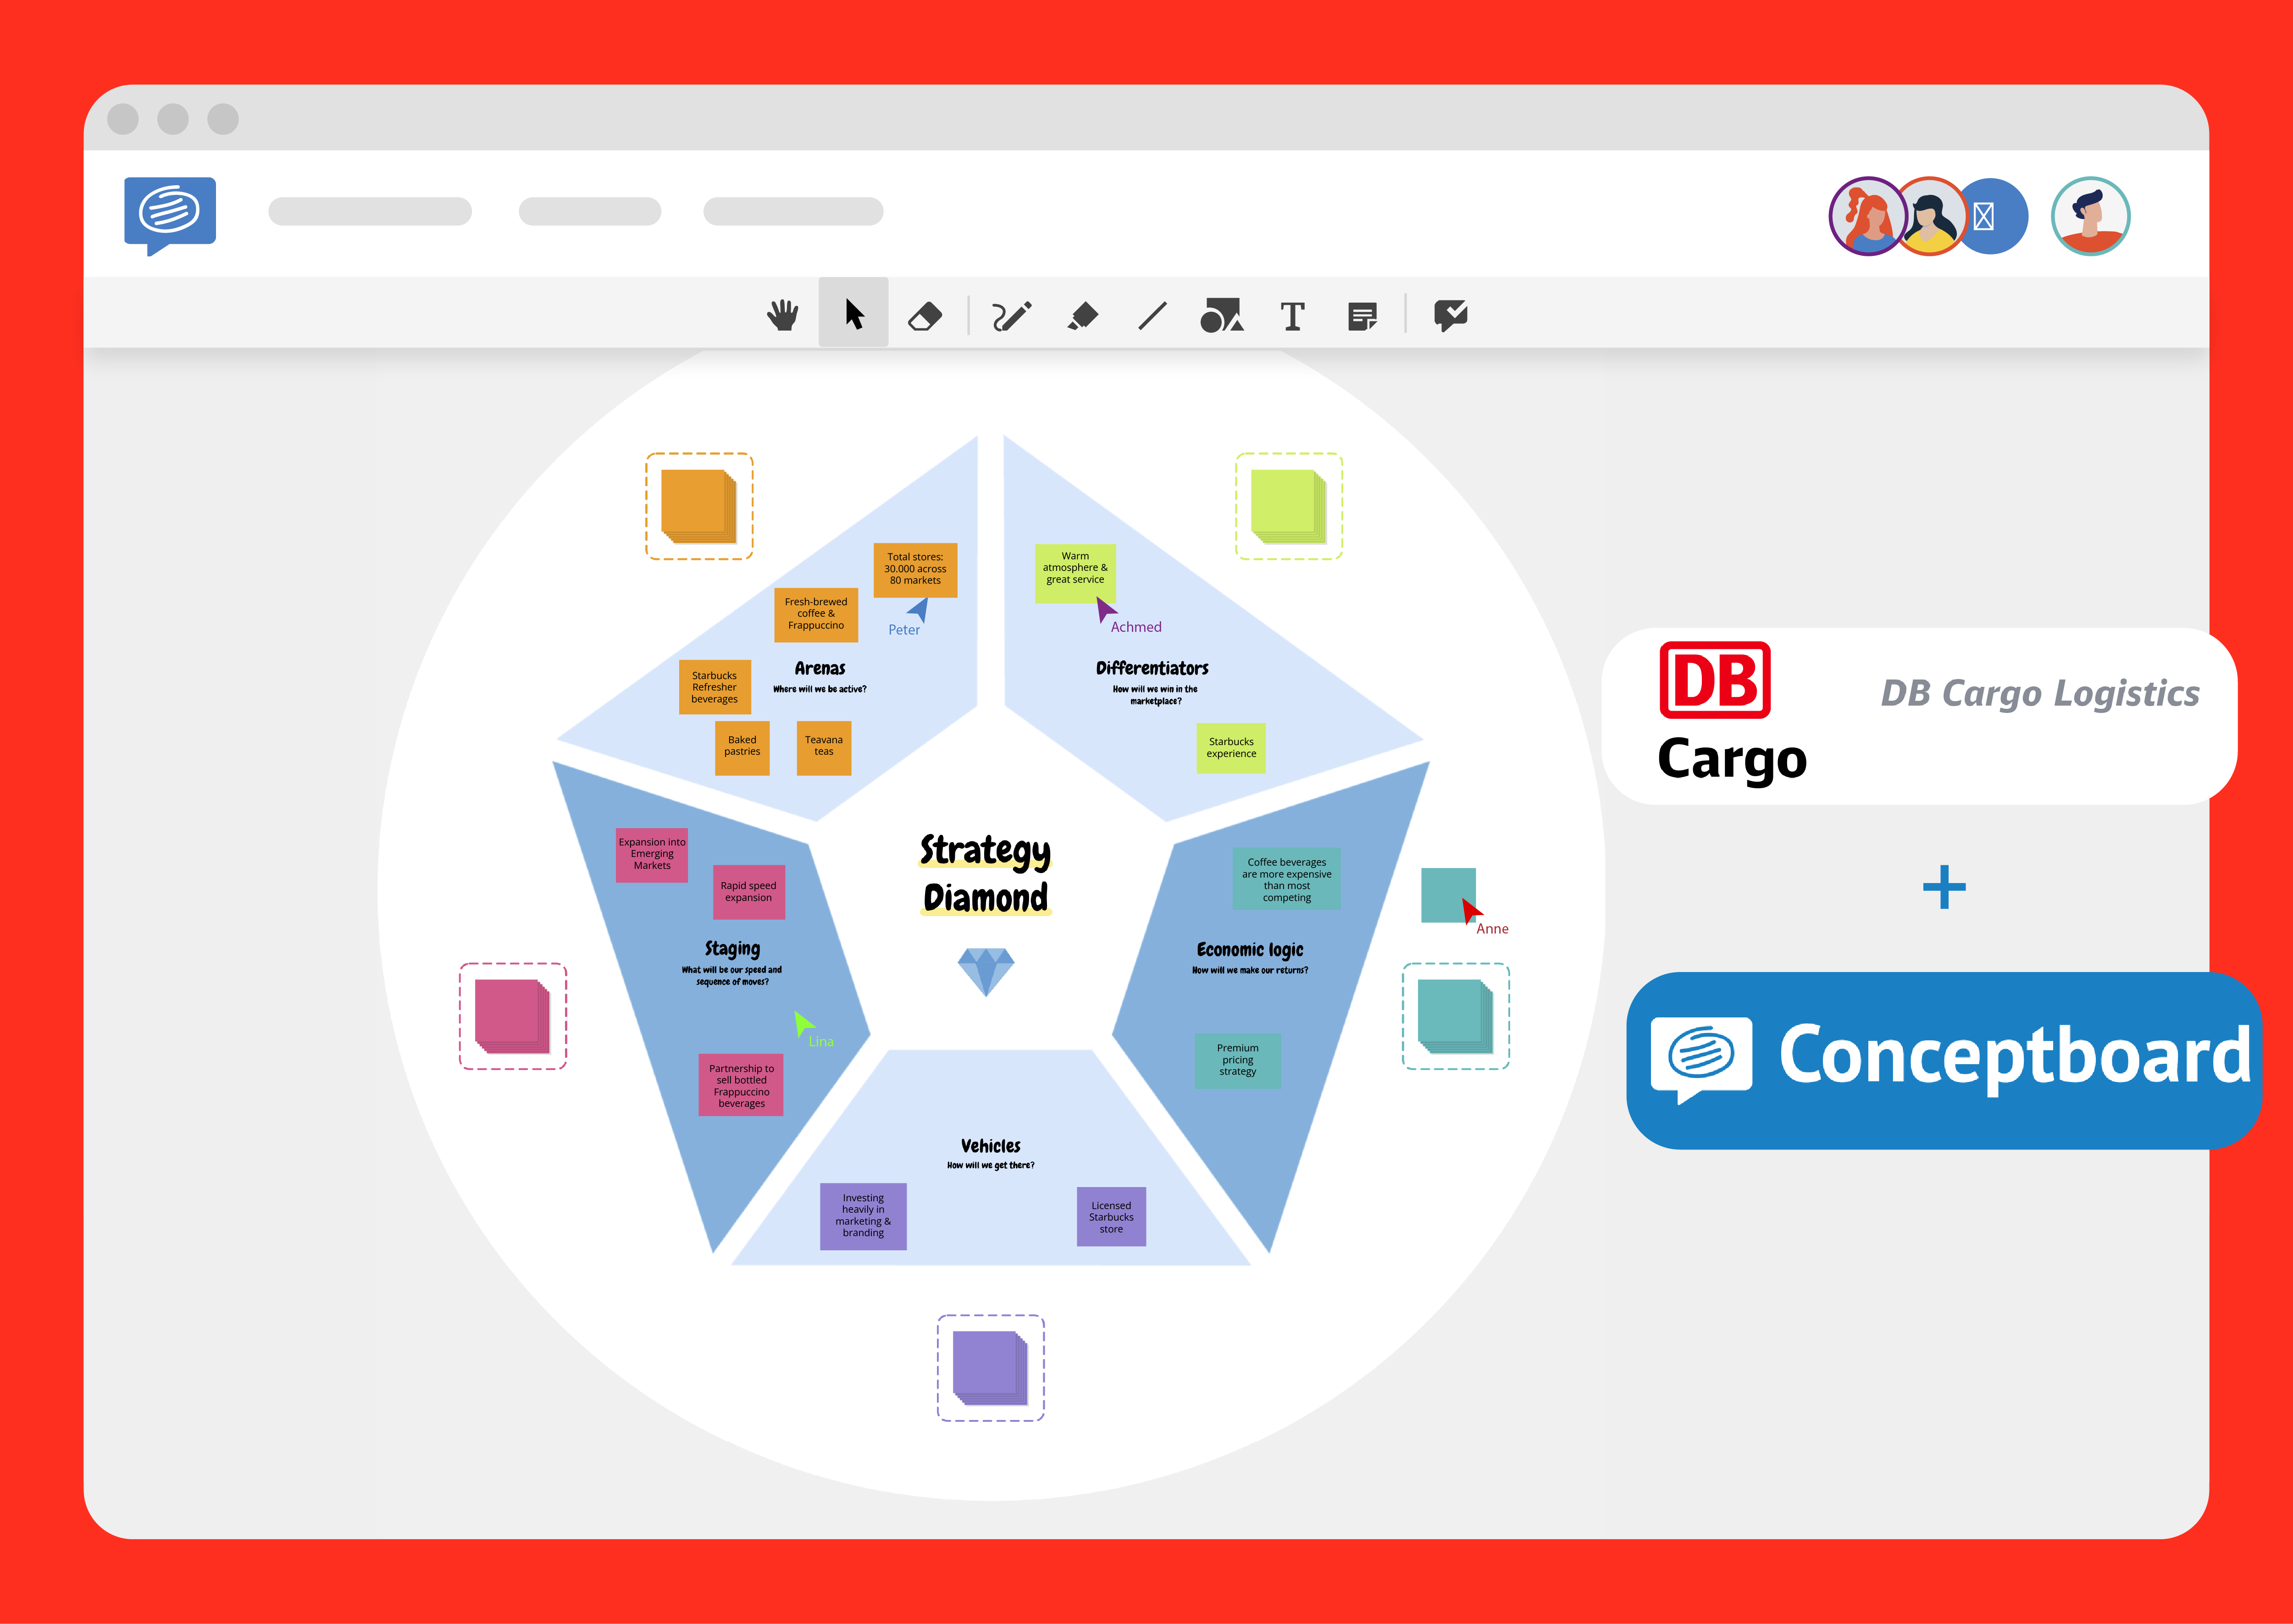 DB Cargo Logistics links Creativity and mobile working with Conceptboard